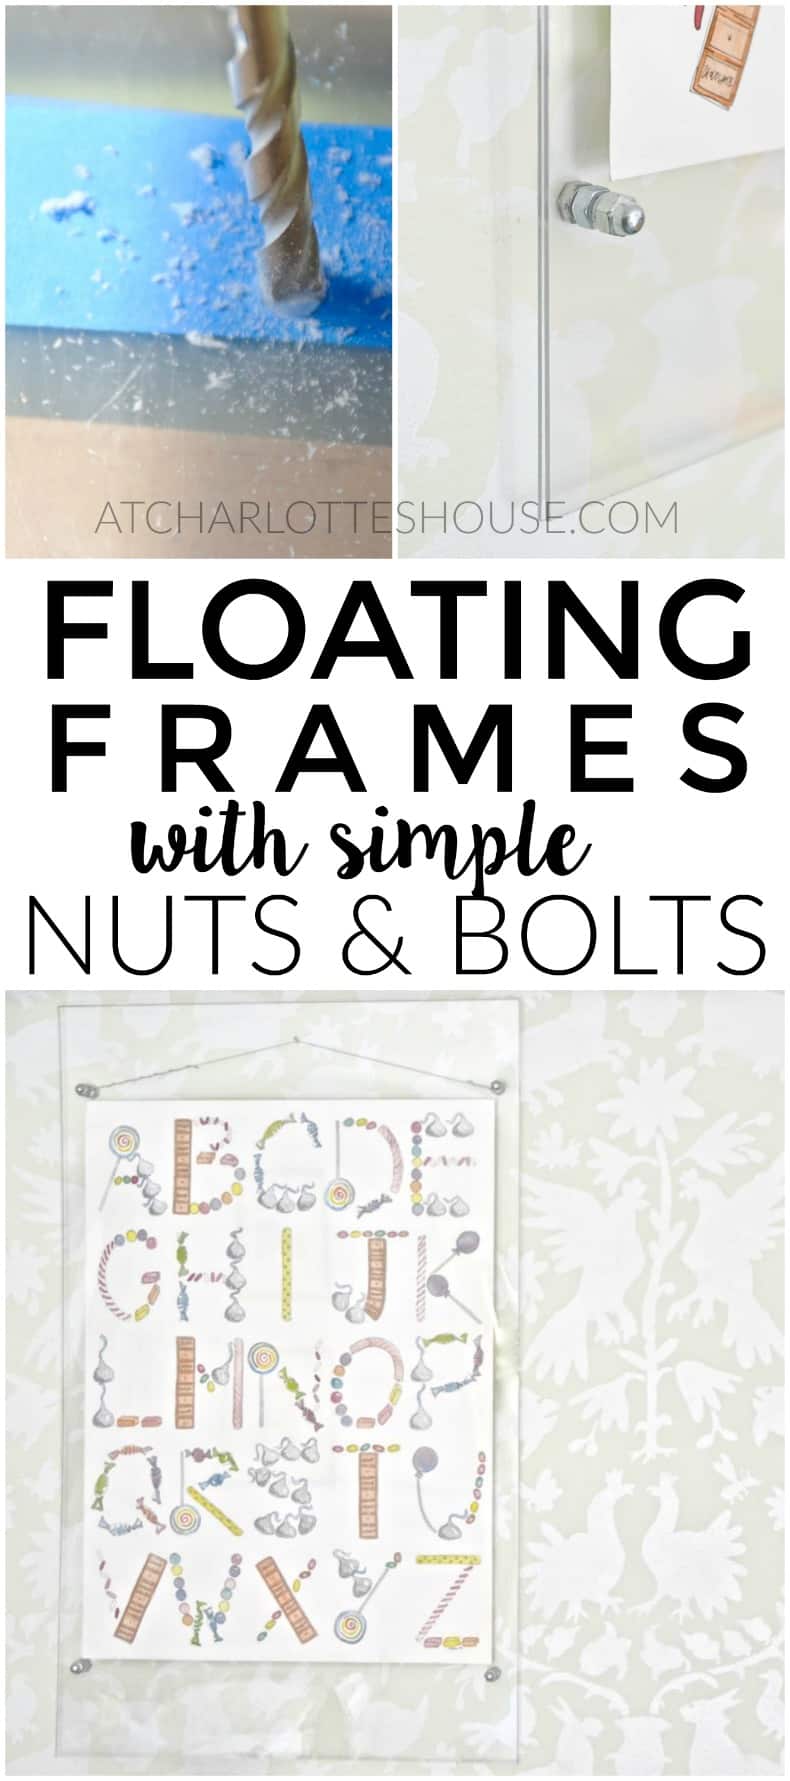 These floating frames cost $30 and I LOVE them... I'd love to use a smaller size and make a whole gallery wall!